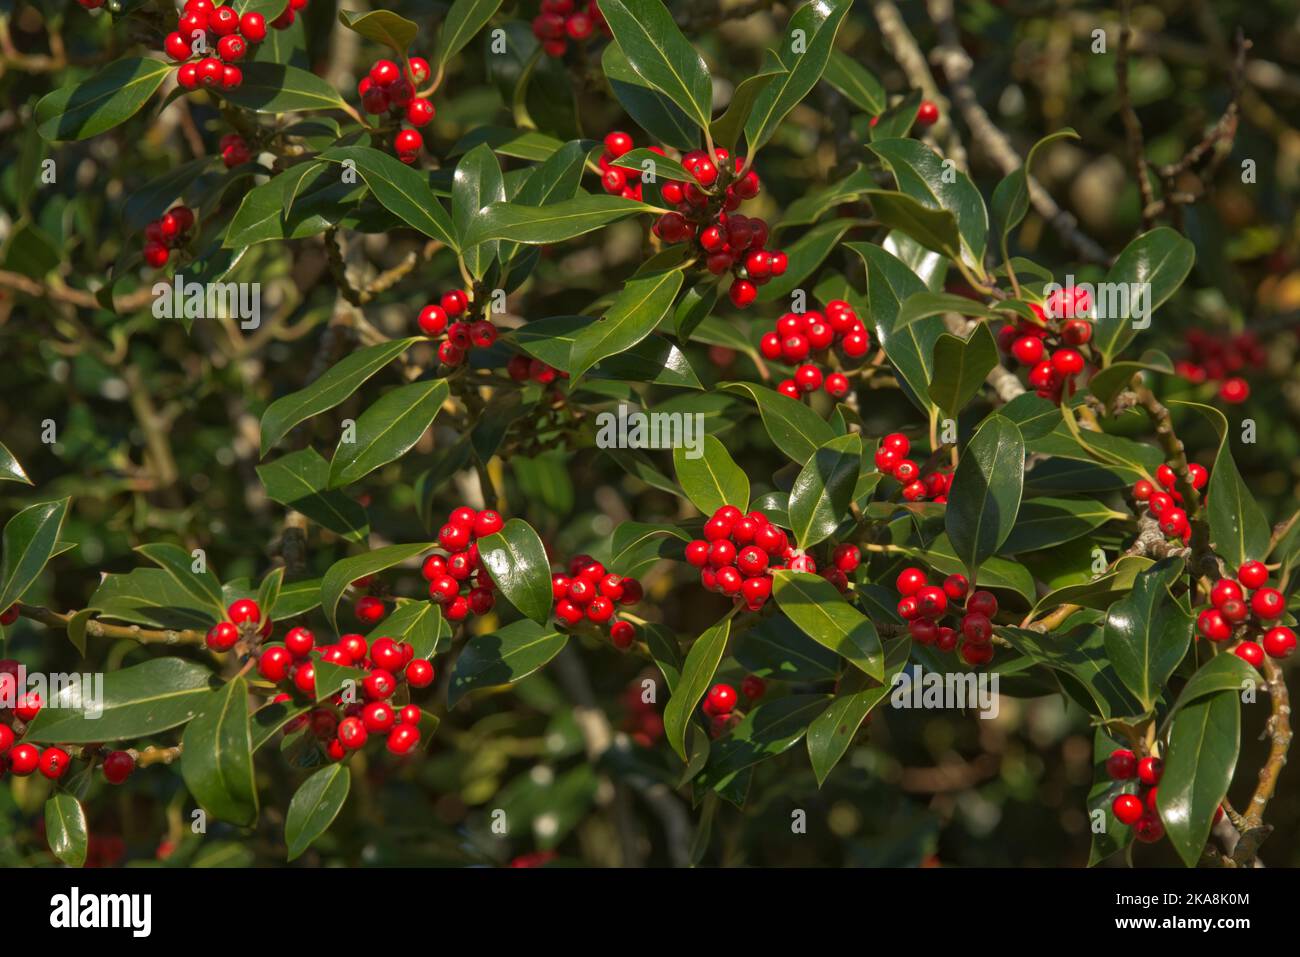 Ripe red holly (Ilex aquifolium) berries among upper most non-spiky leaves on the tree in early autumn, Berkshire, October Stock Photo